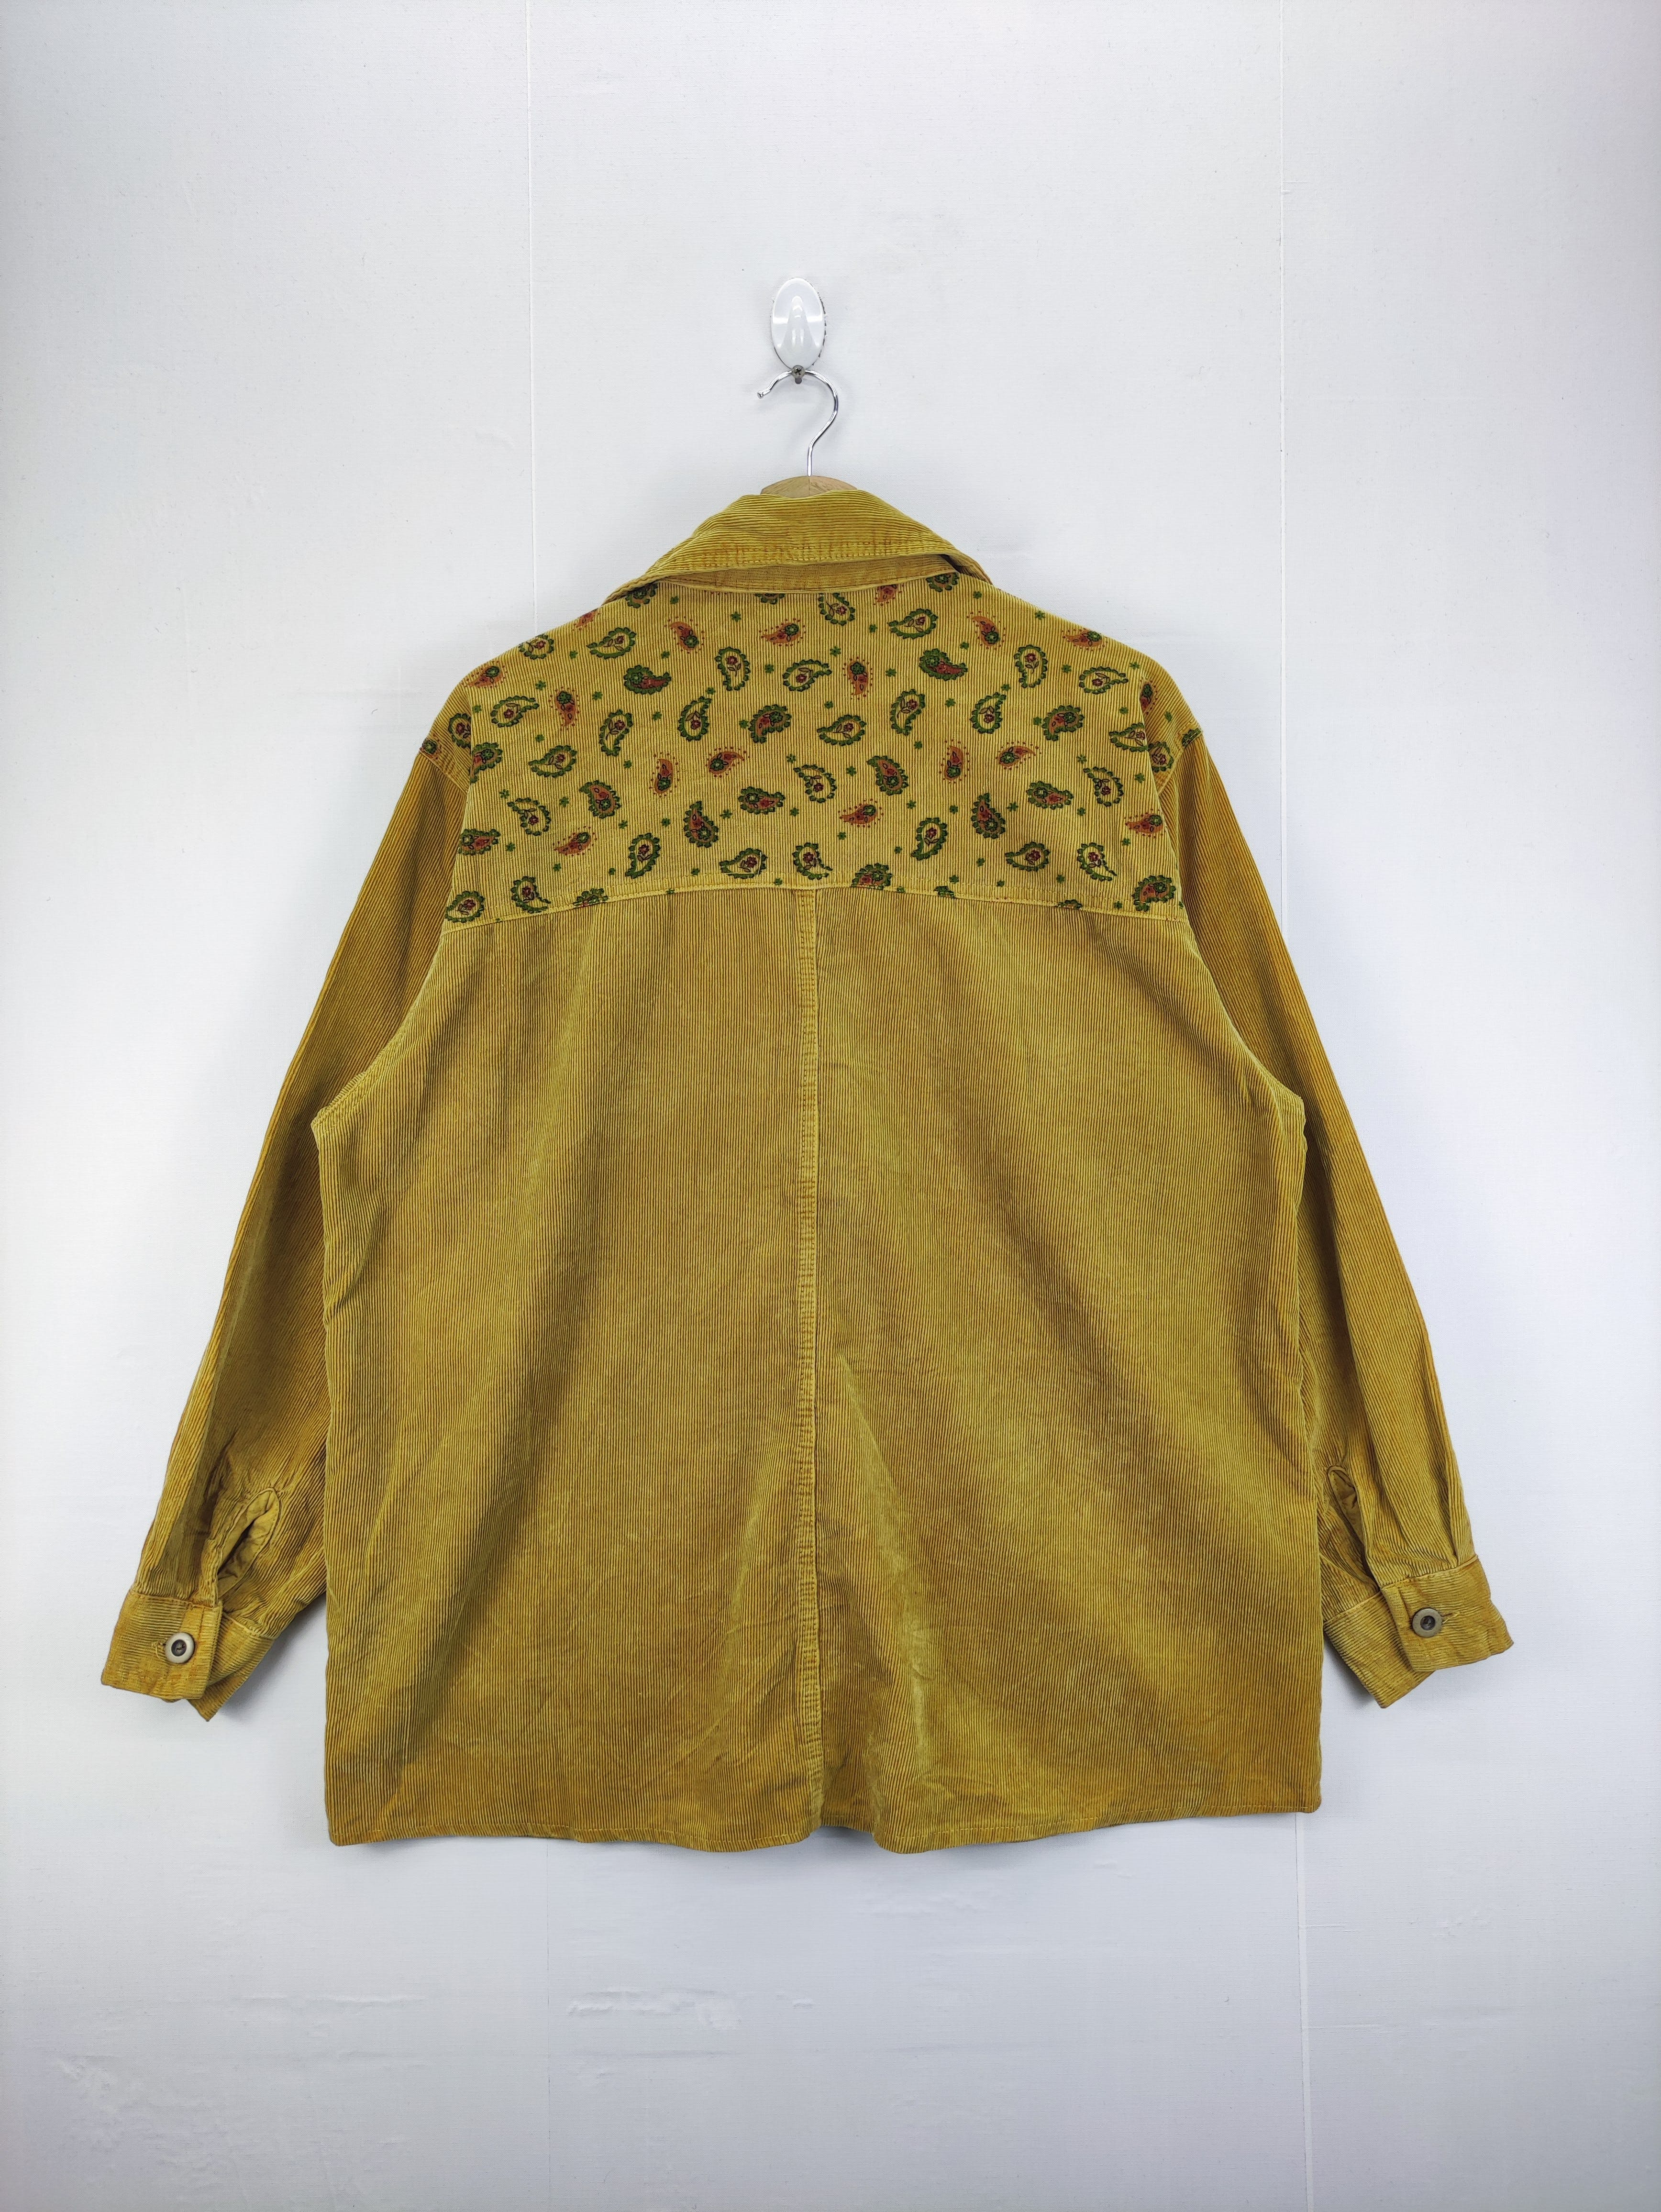 Vintage Corduroy Jacket Button Up By Unbrand - 3